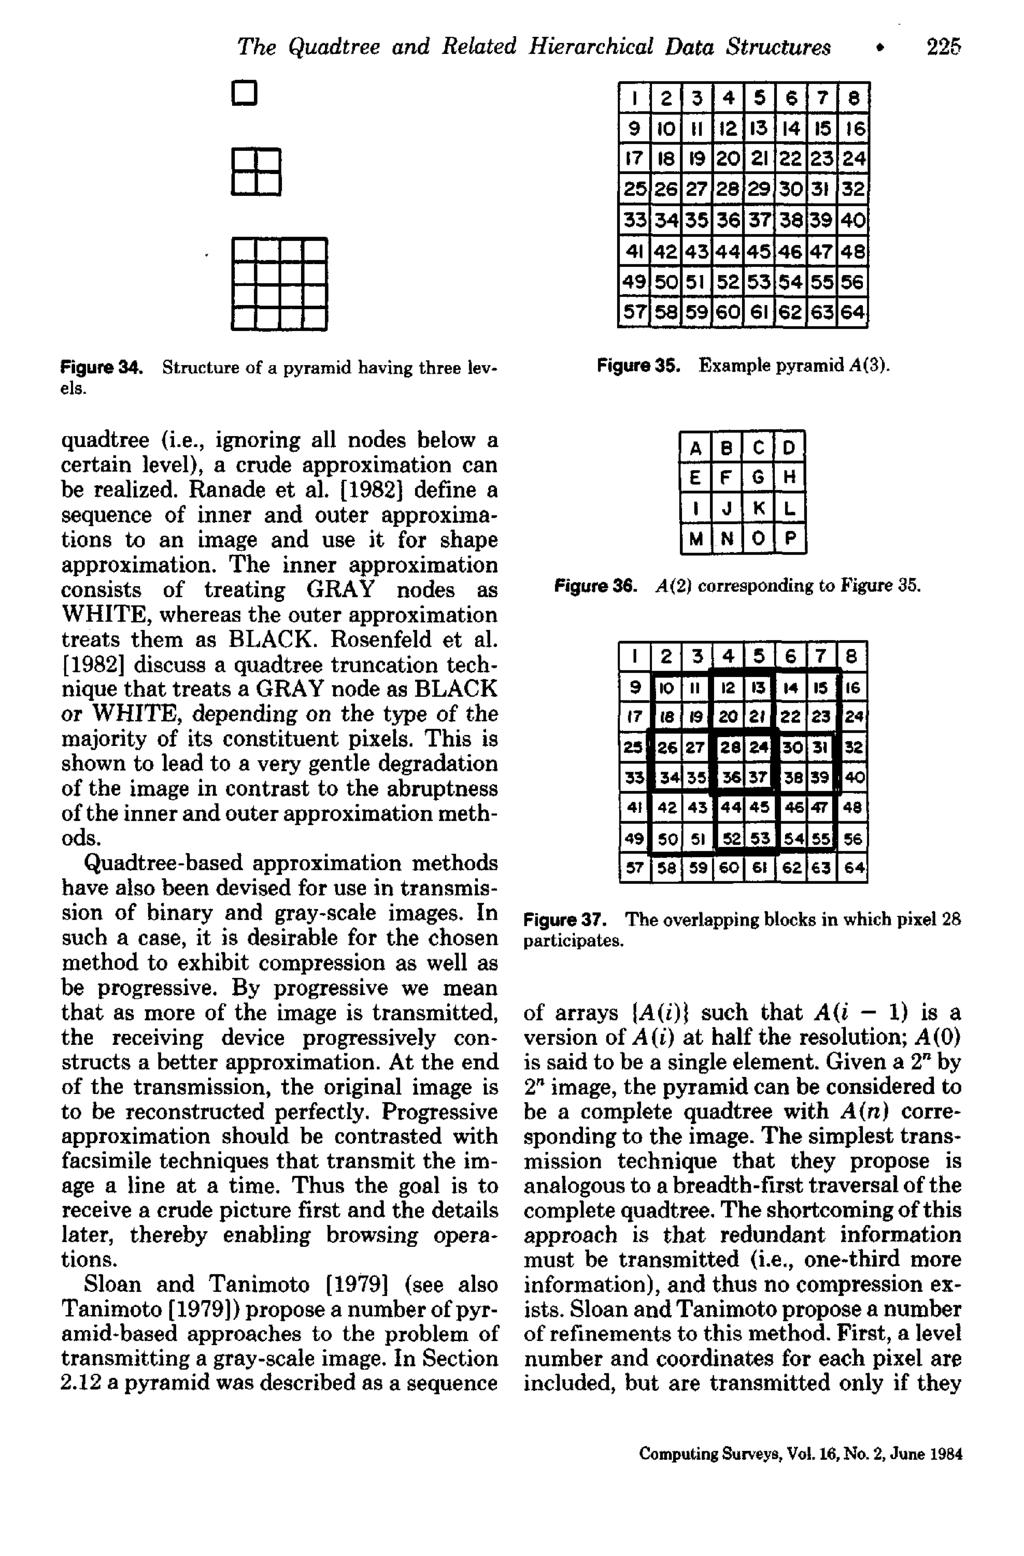 The Quadtree and Related Hierarchical Data Structures 225 0 EE I 2 3 4 5 6 1 e 9 10 II 12 13 14 15 16 17 16 19 20 21 22 23 24 25 26 27 28 29 30 31 32 33 34 35 36 37 38 39 40 41 42 43 44 45 46 47 48